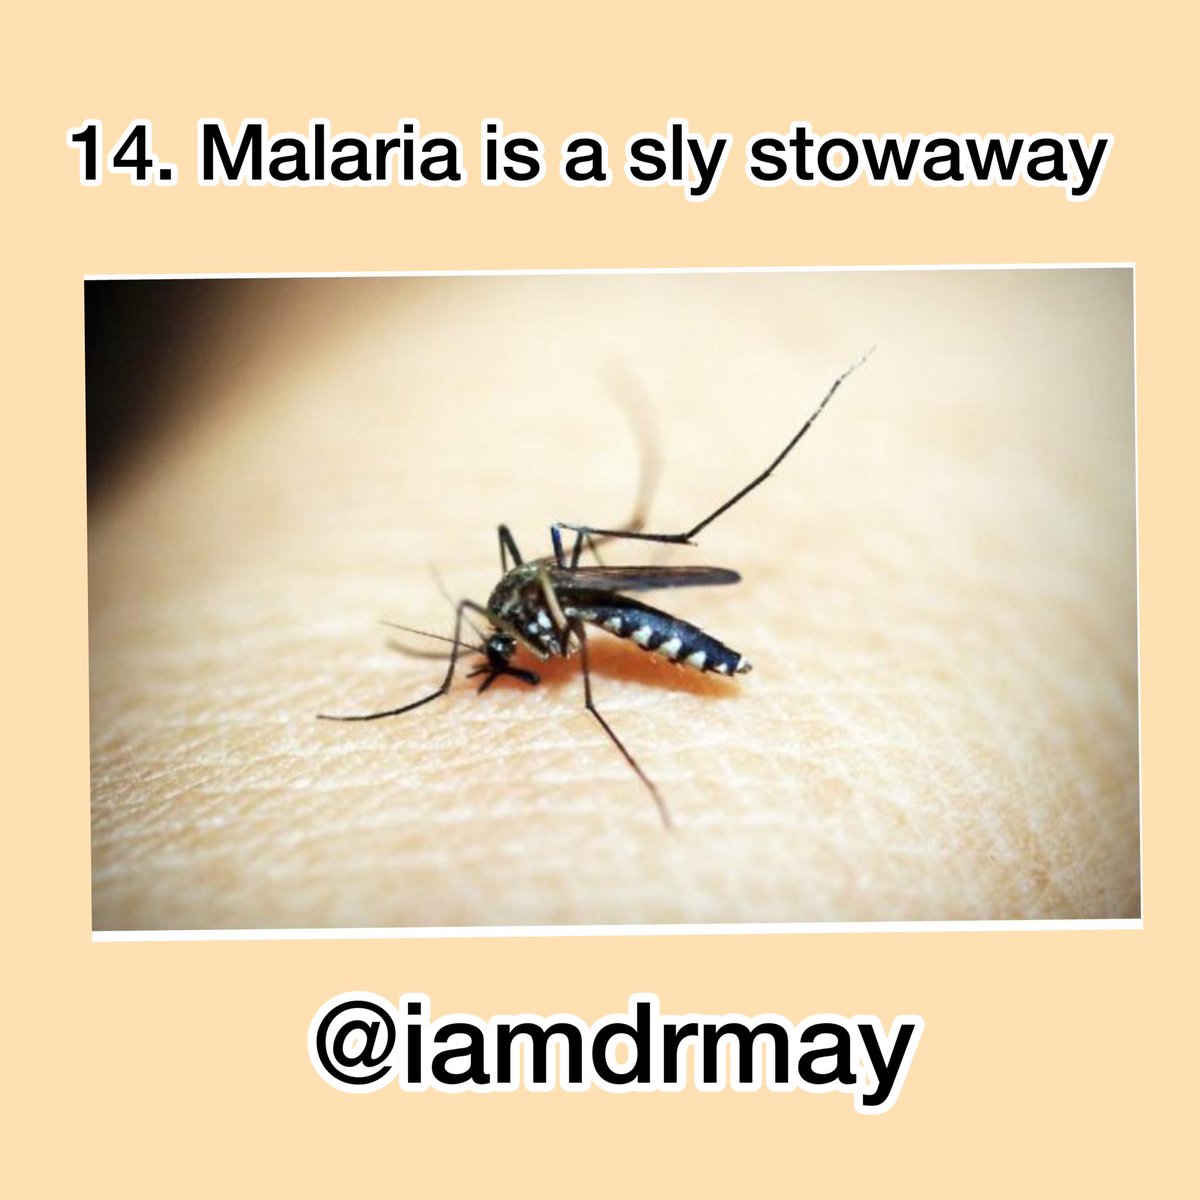 There’s actually a thing called “airport malaria” where a malaria-carrying mosquito hitches a ride on an airplane & travels from one country to another.D infected mosquito usually comes 4m a country where malaria is prevalent. Take ur shot if this affects u  #WorldMalariaDay2021